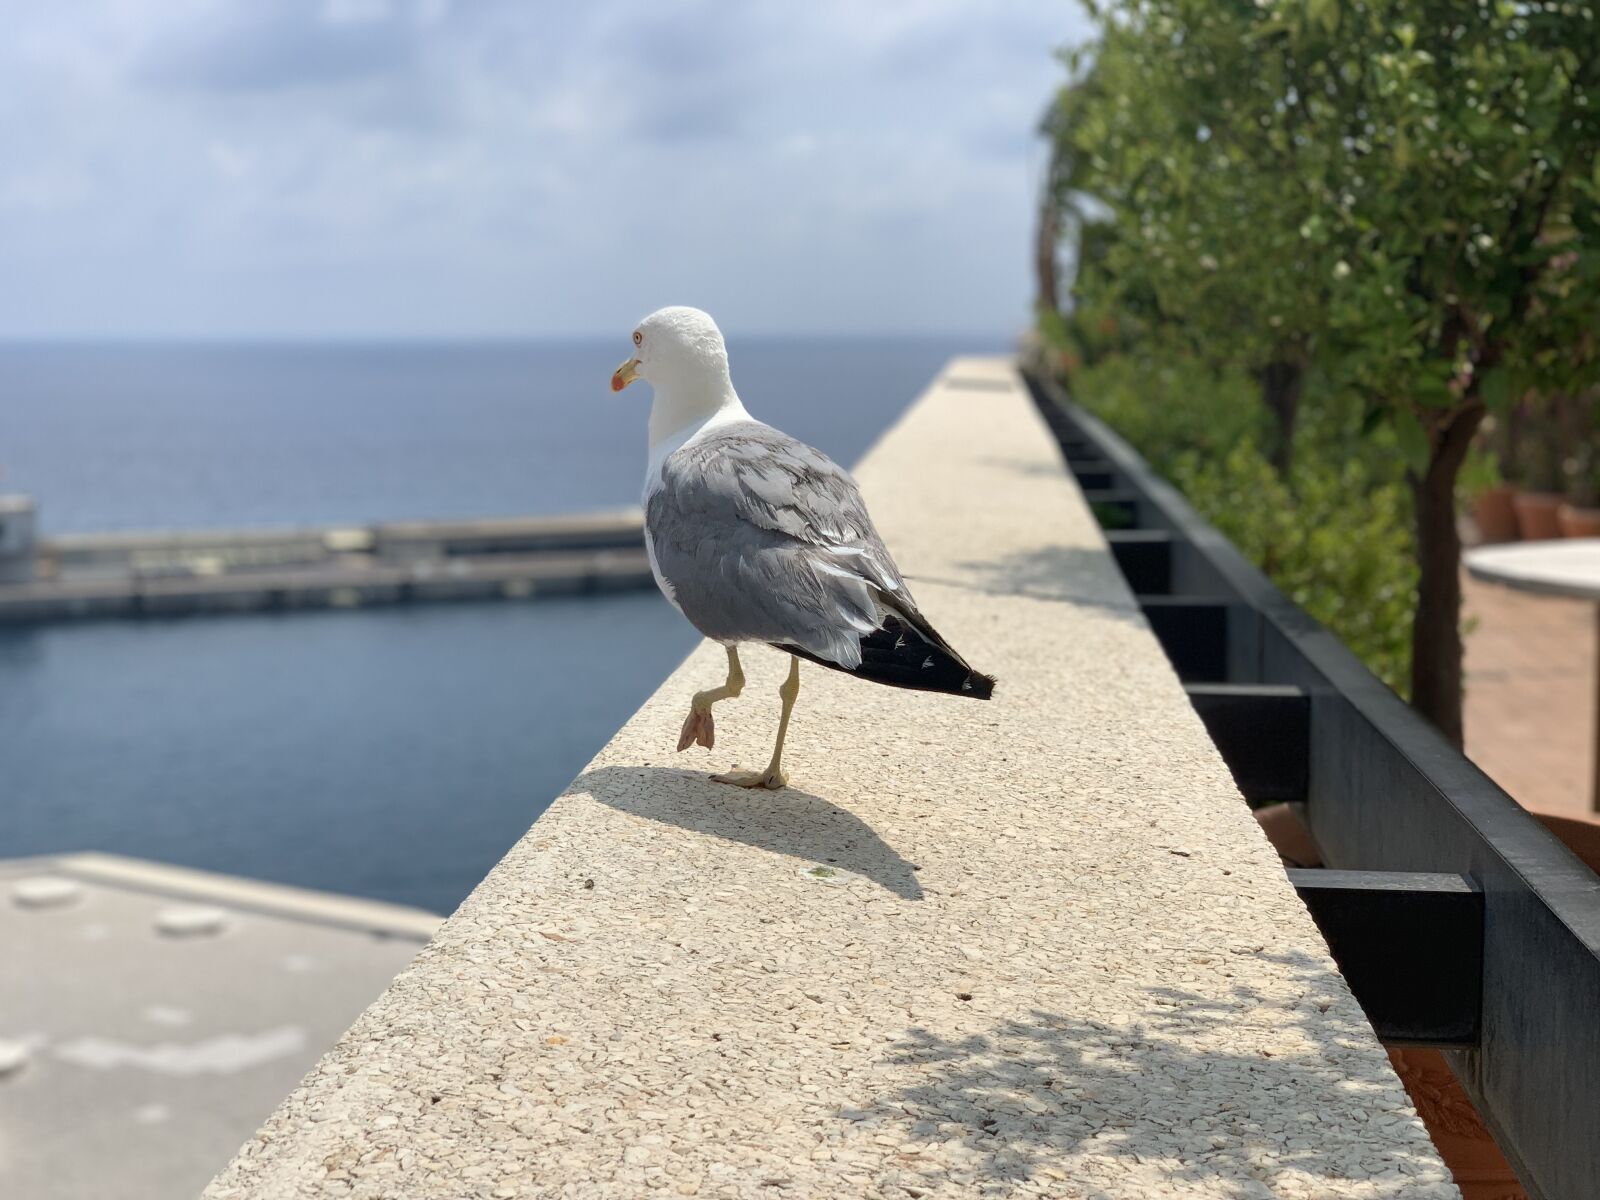 Apple iPhone XS Max + iPhone XS Max back dual camera 6mm f/2.4 sample photo. Seagull, montecarlo, summer photography